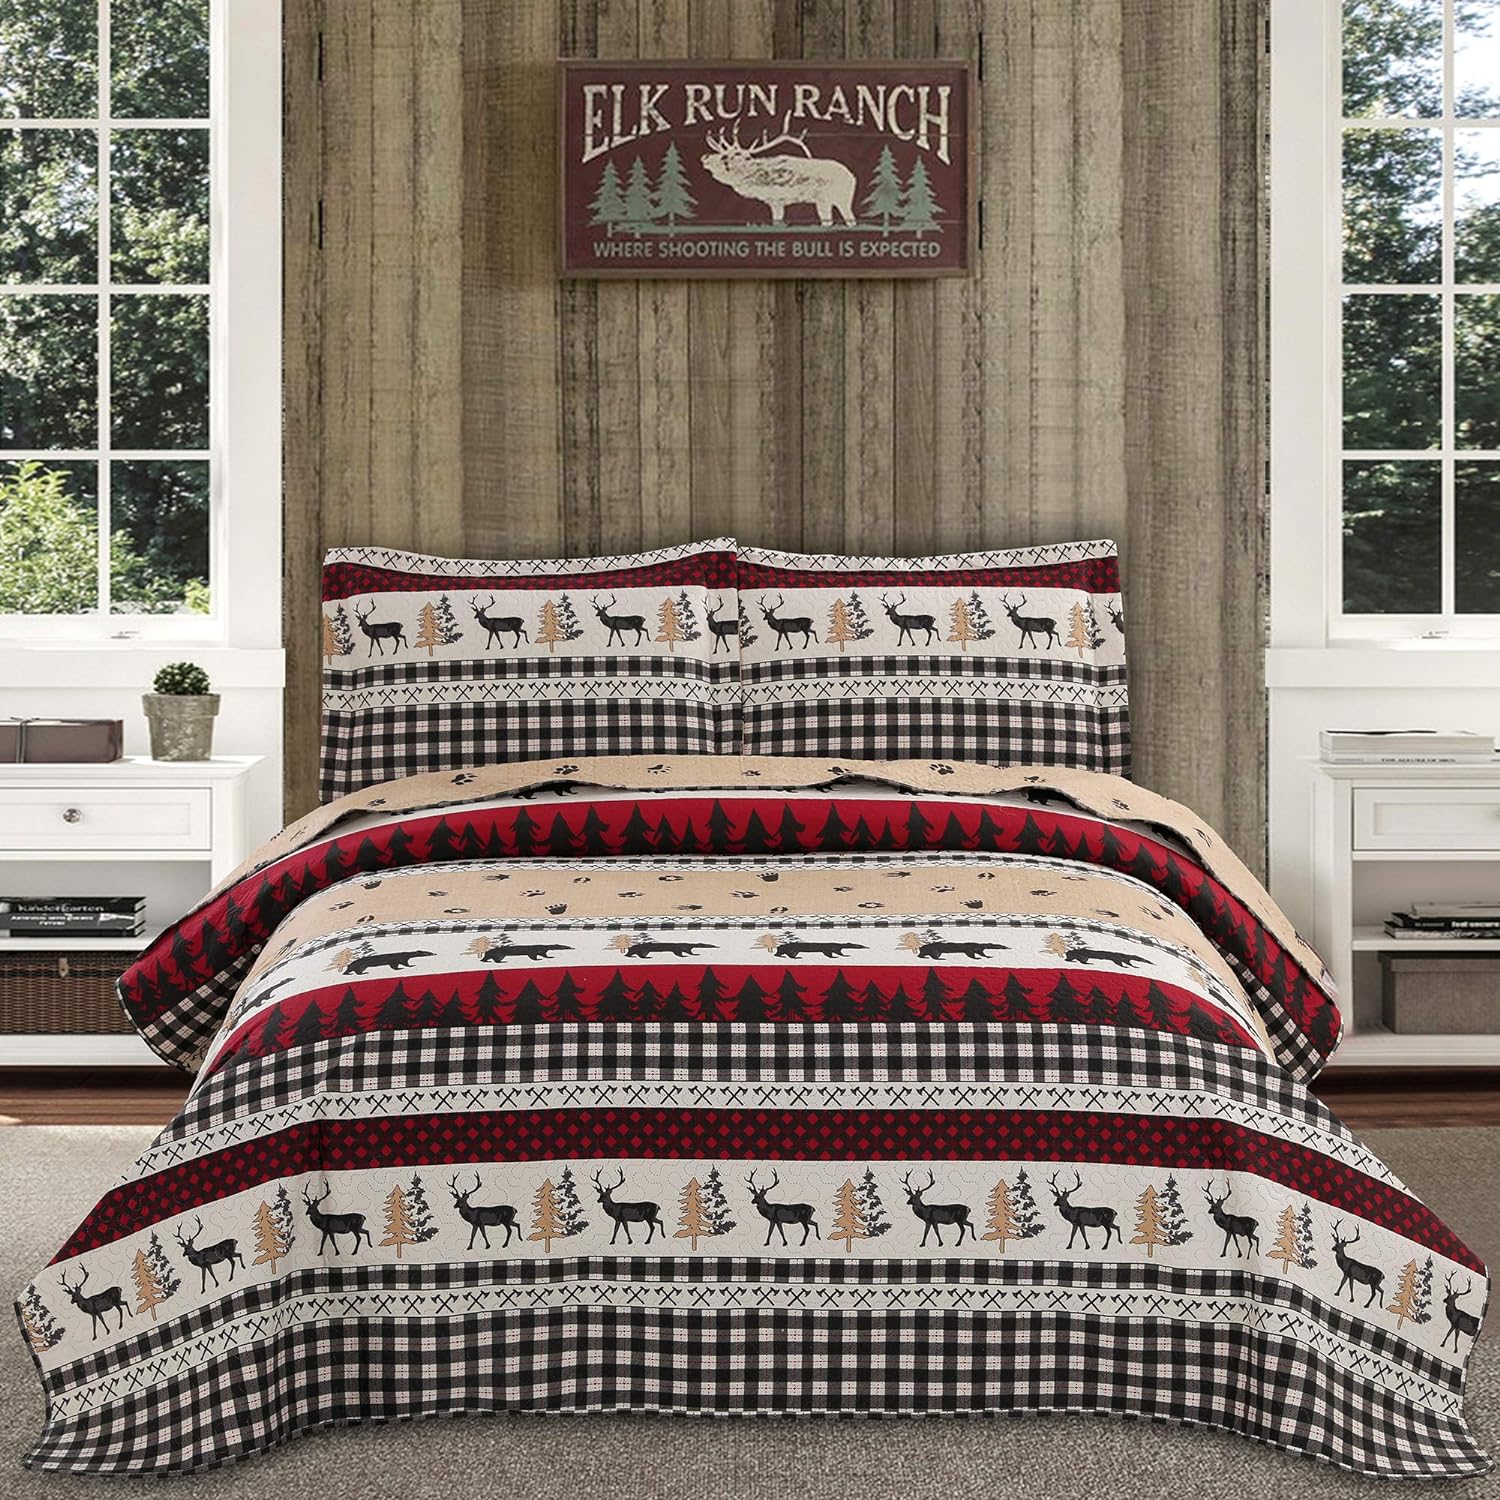 Jessy Home Rustic Quilt Bedding Set, Rustic Twin Bedding Sets